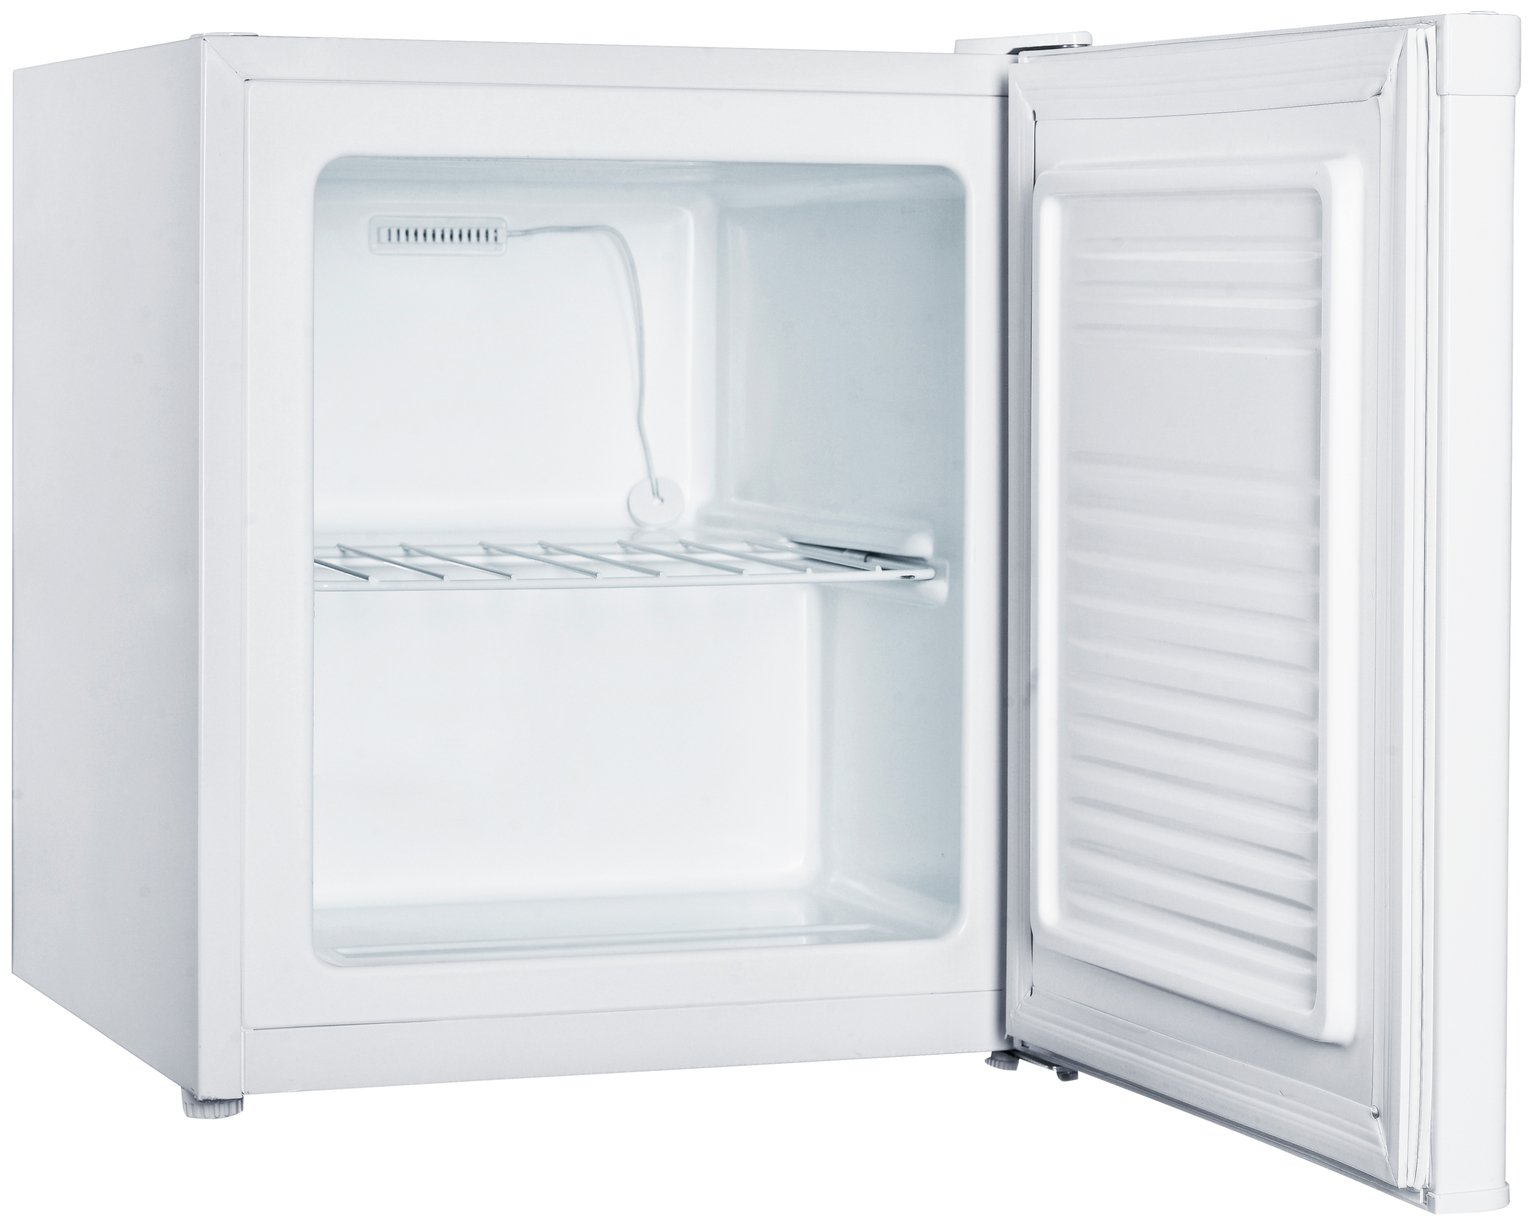 Simple Value DD1-05 Table Top Freezer Review